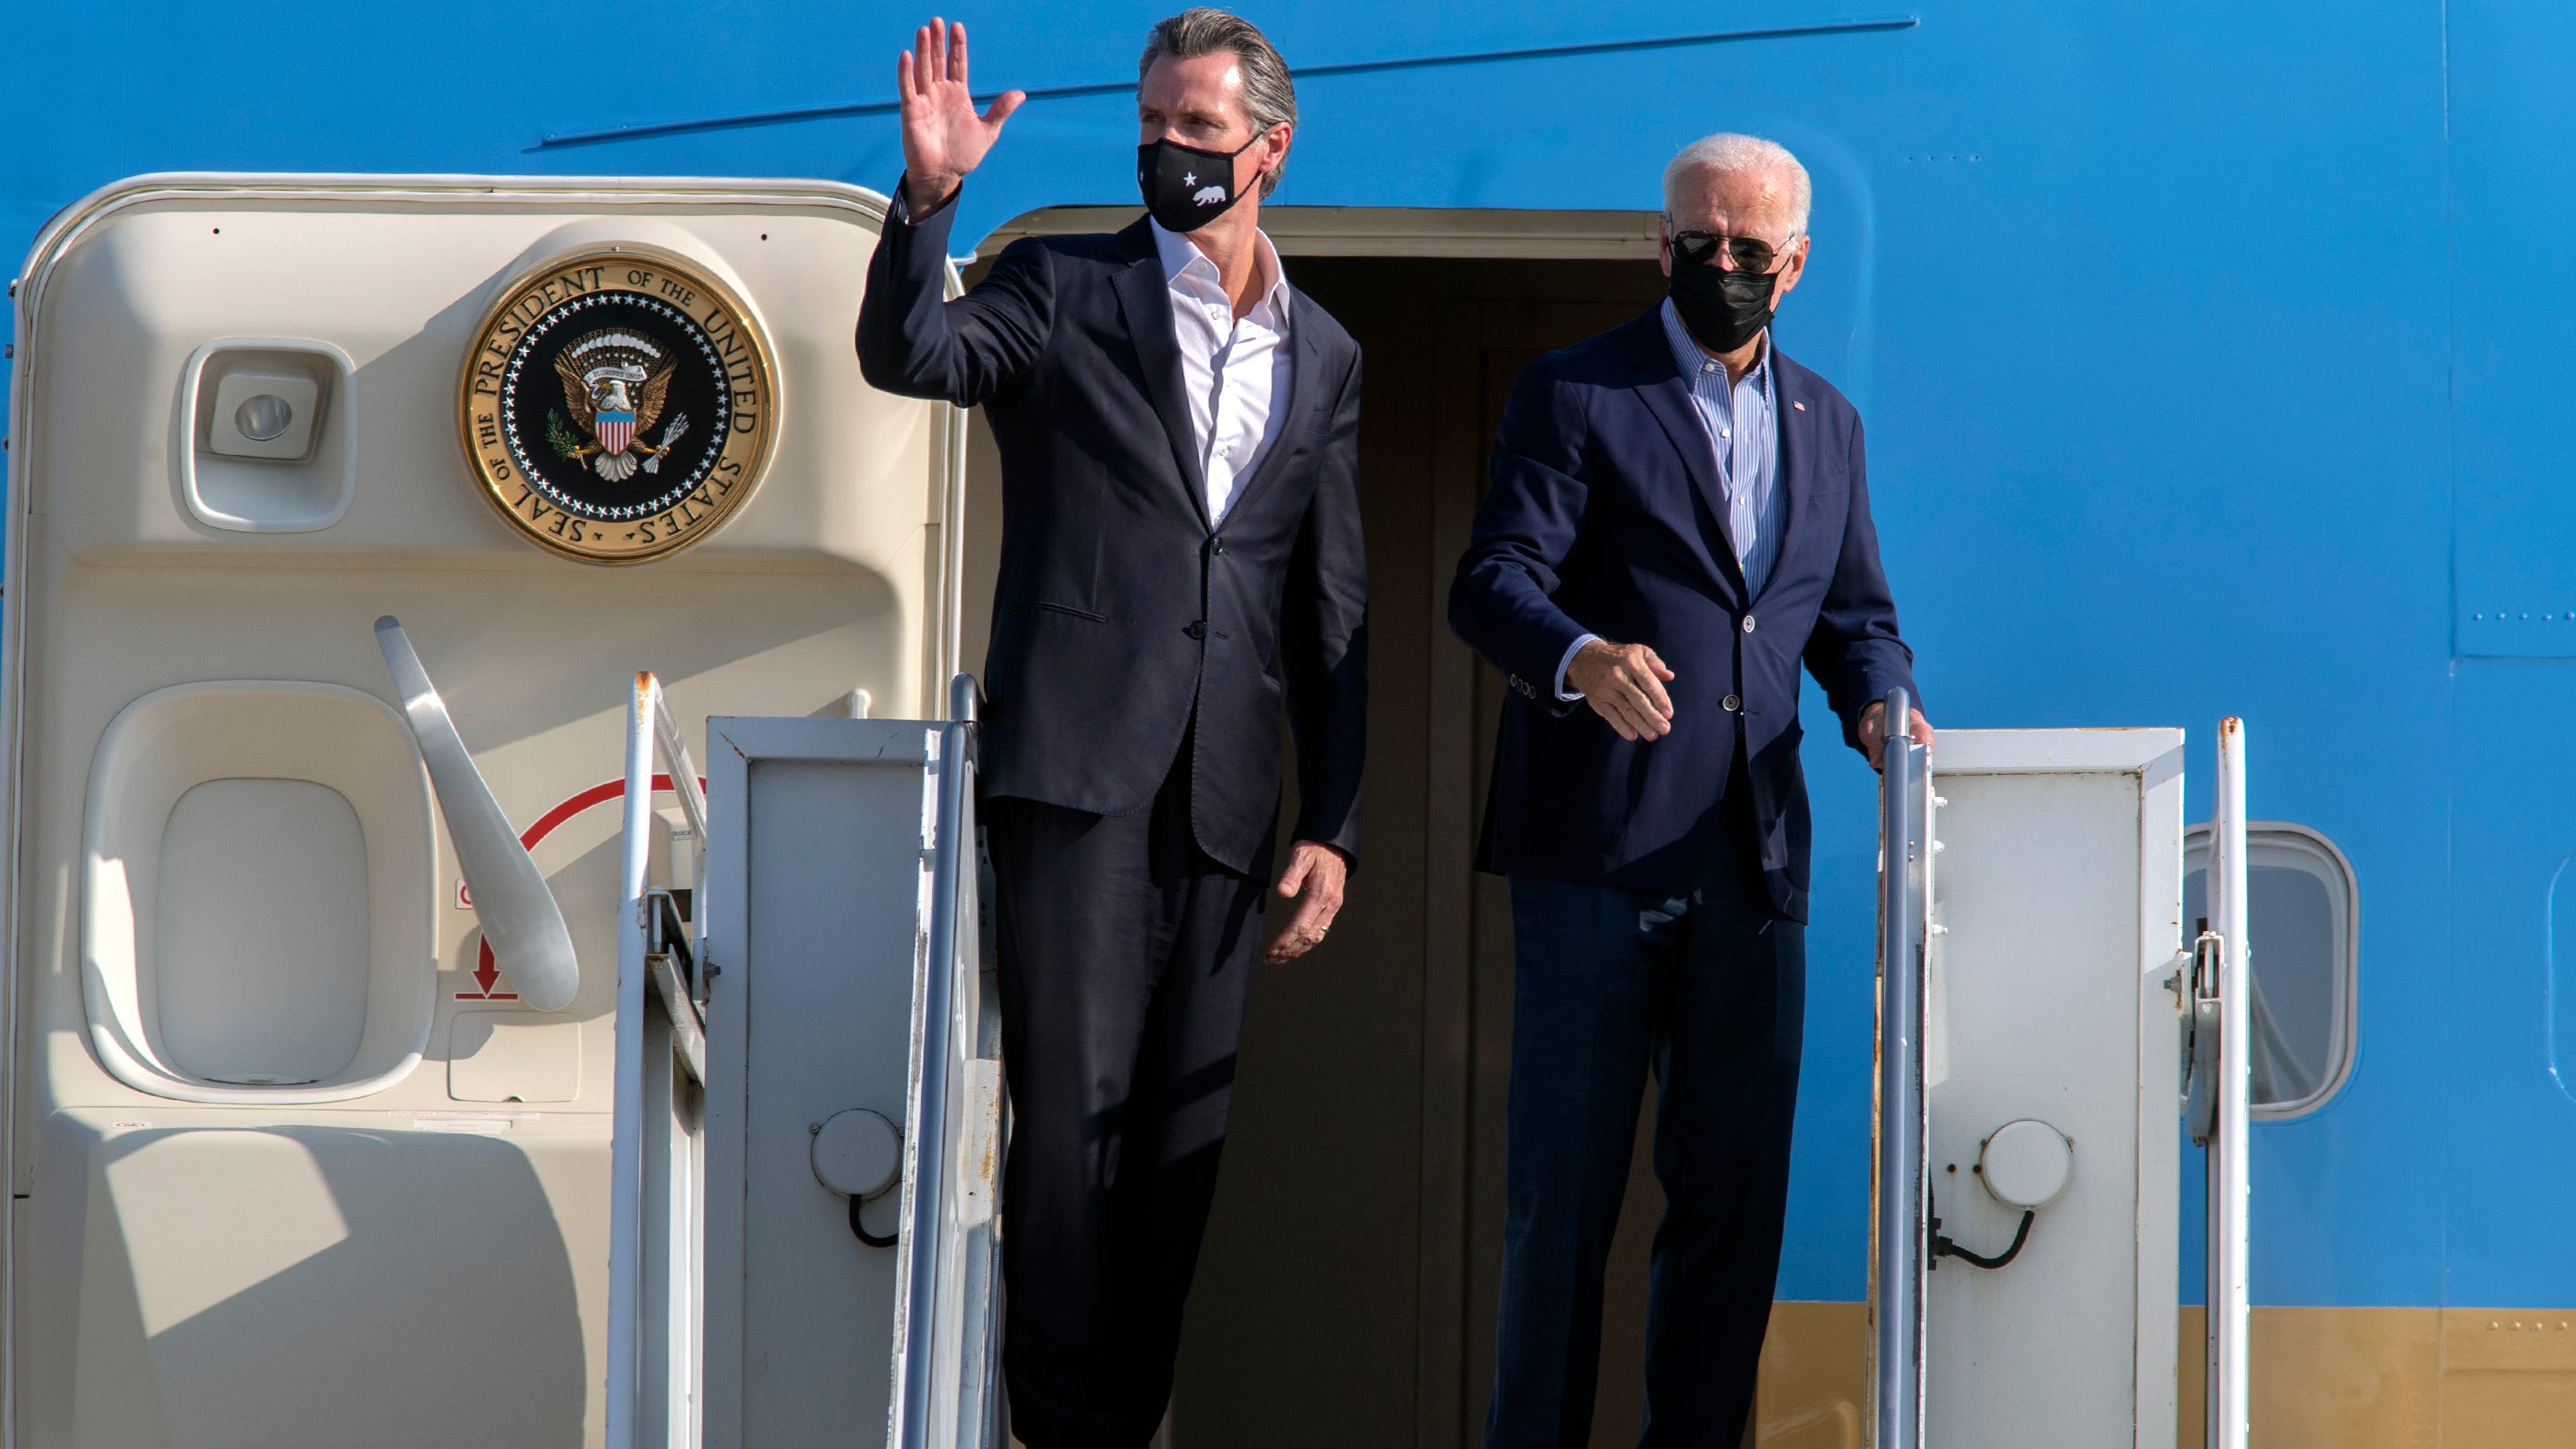 Biden discusses wildfires, climate change and federal collaboration during California trip - Stockton Record